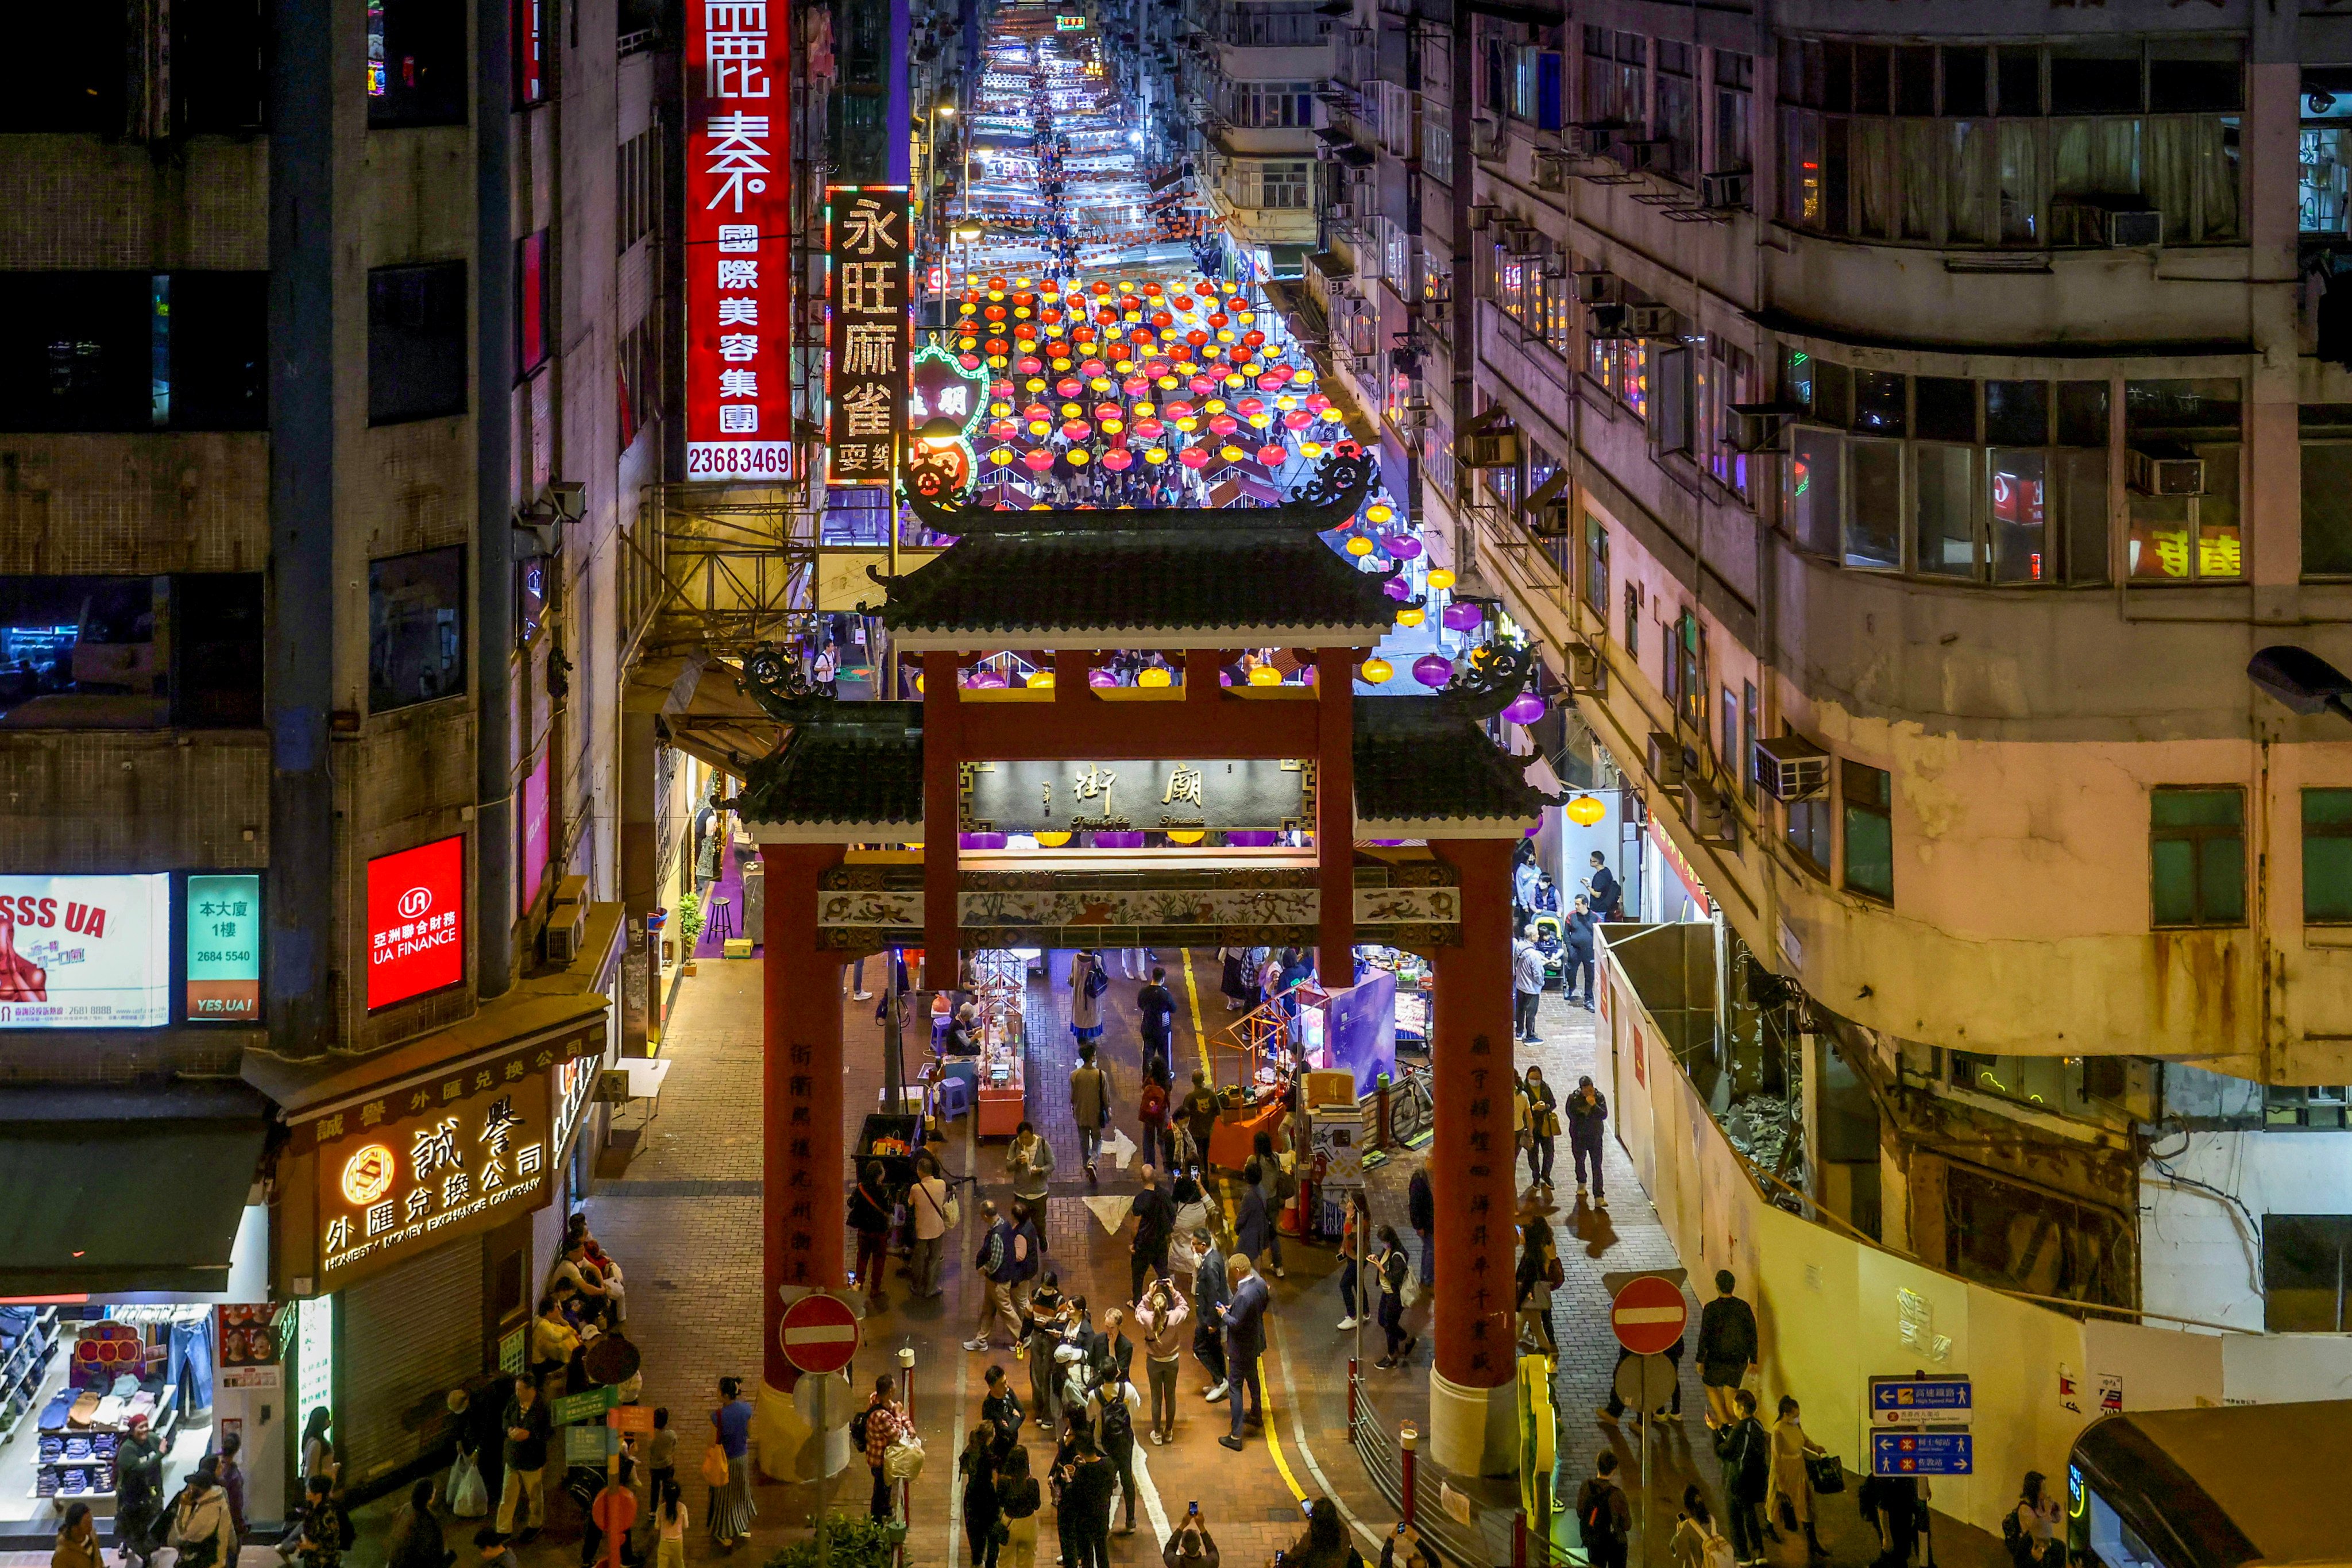 A 350-metre-long section of Temple Street is open as a night market between 2pm and 11pm. Photo: Jonathan Wong